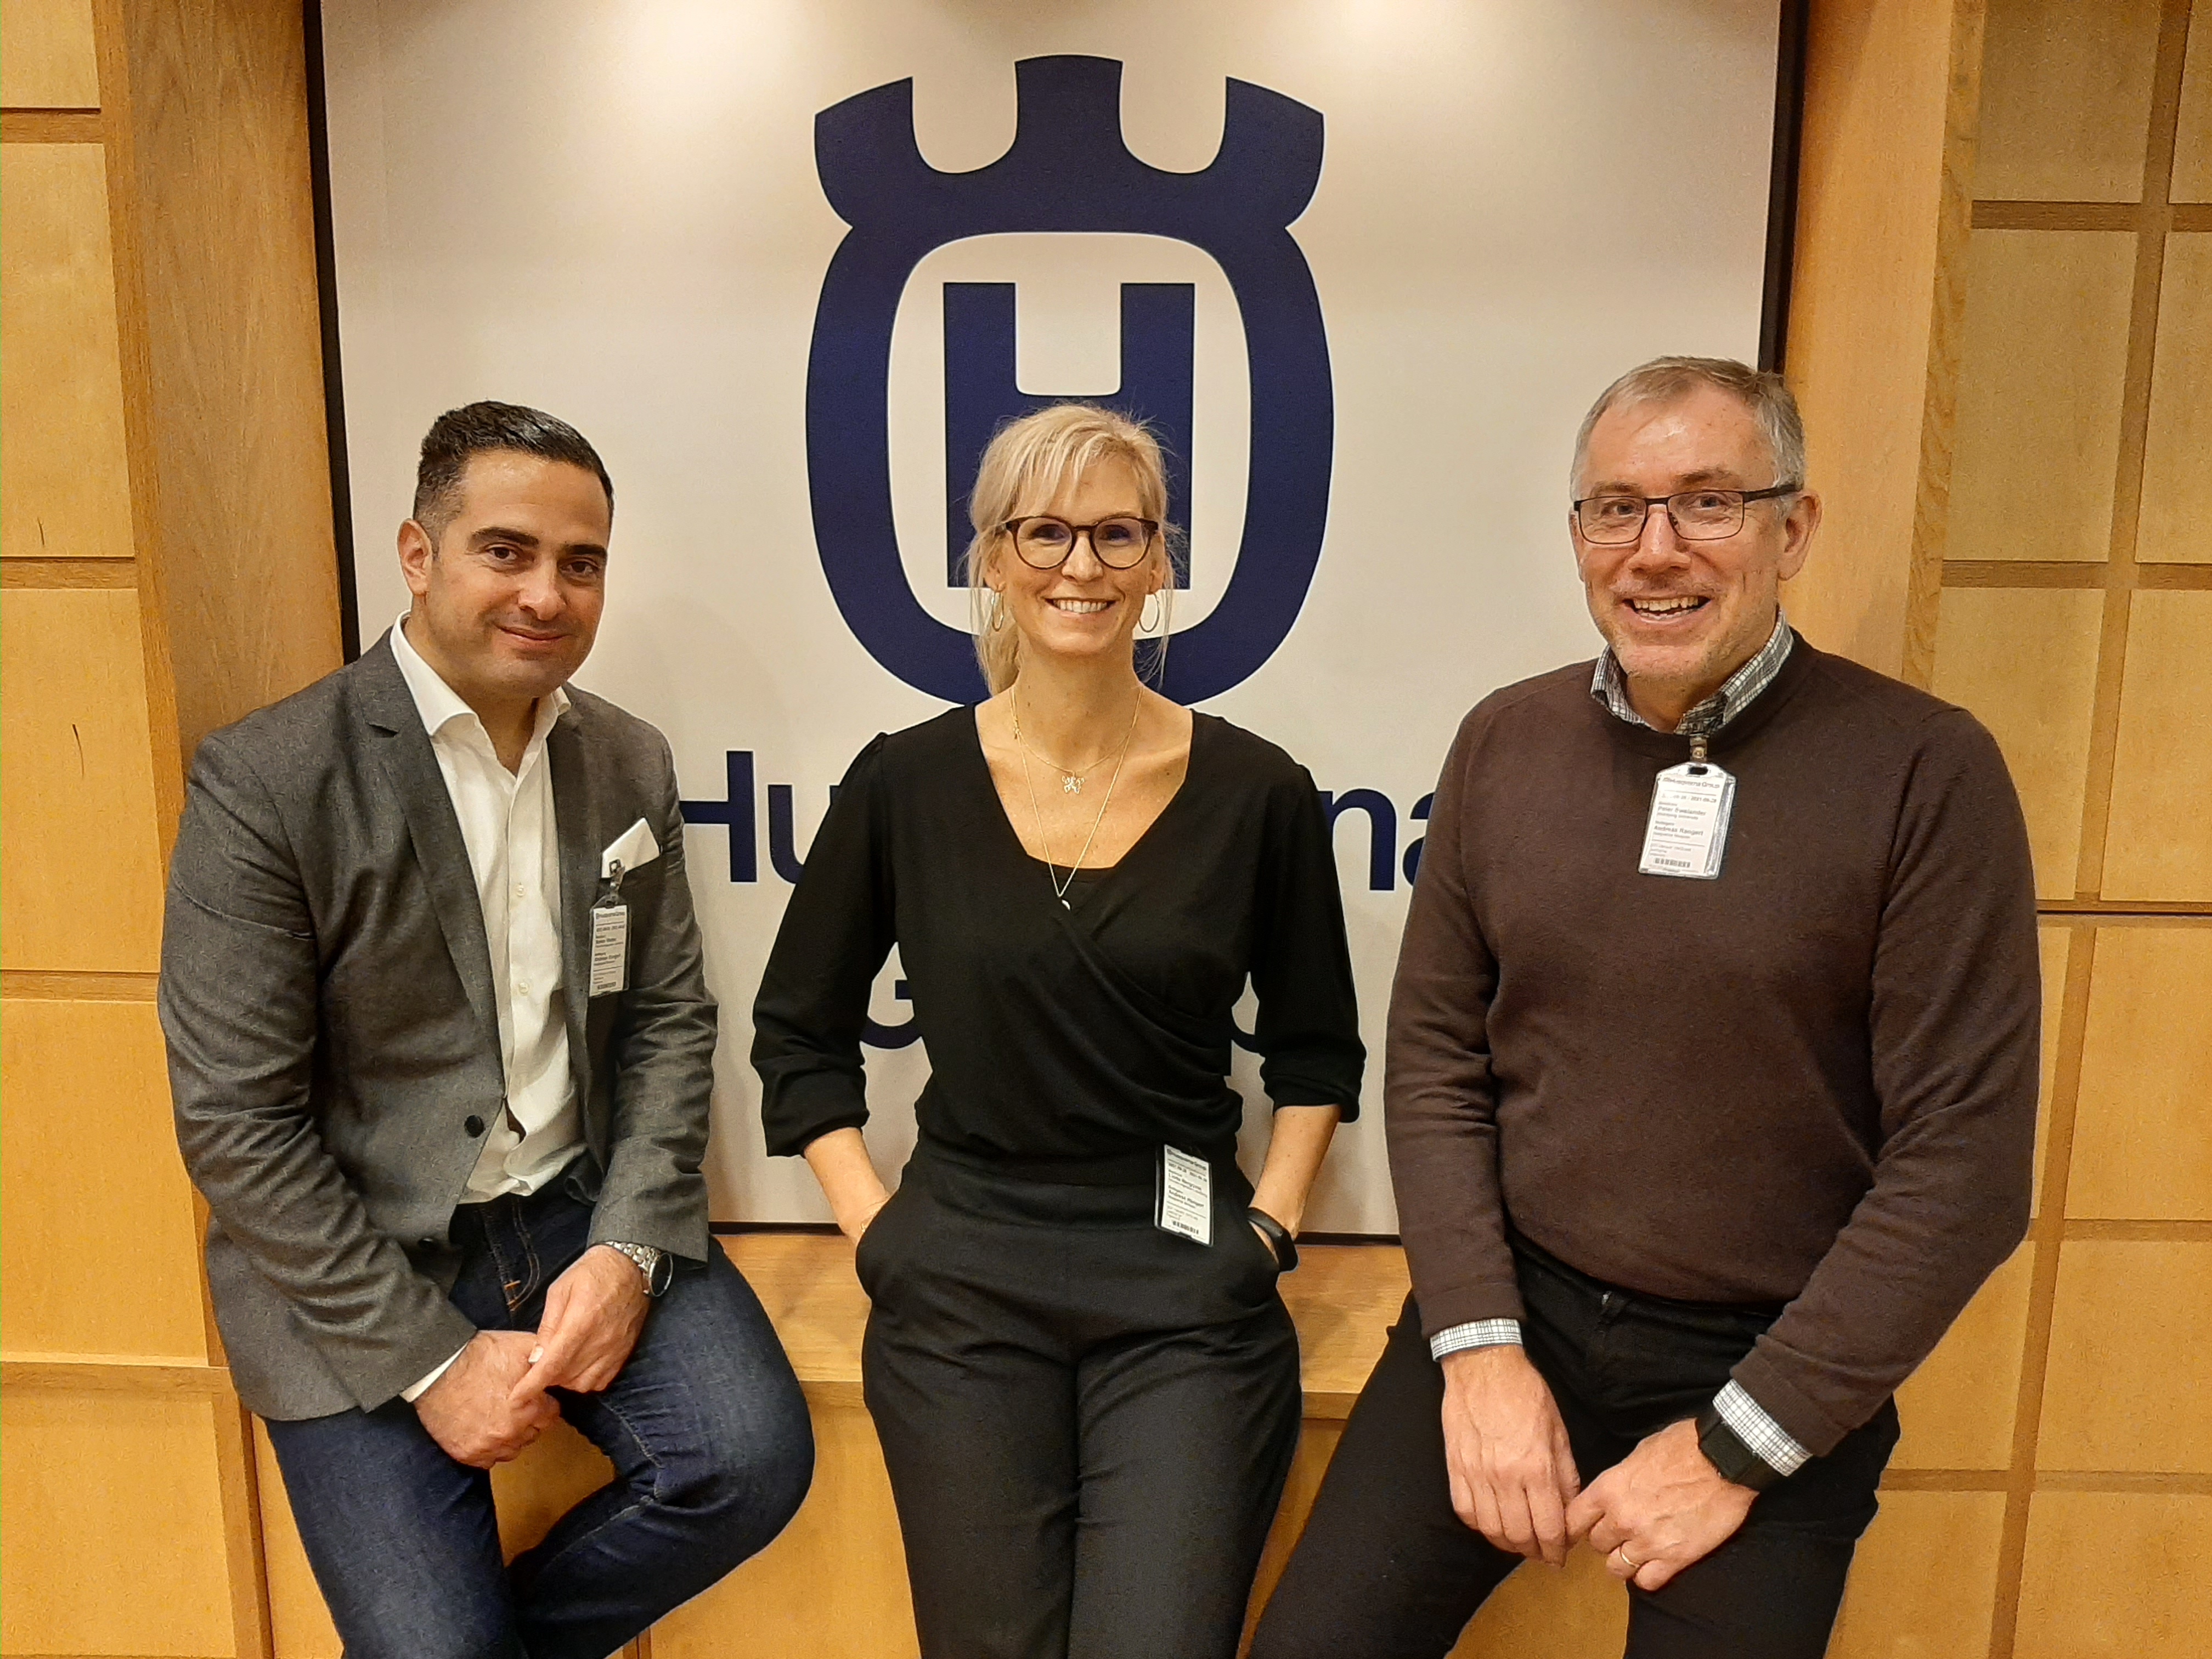 JTH's meeting with its strategic partners within SPARK, at Husqvarna.